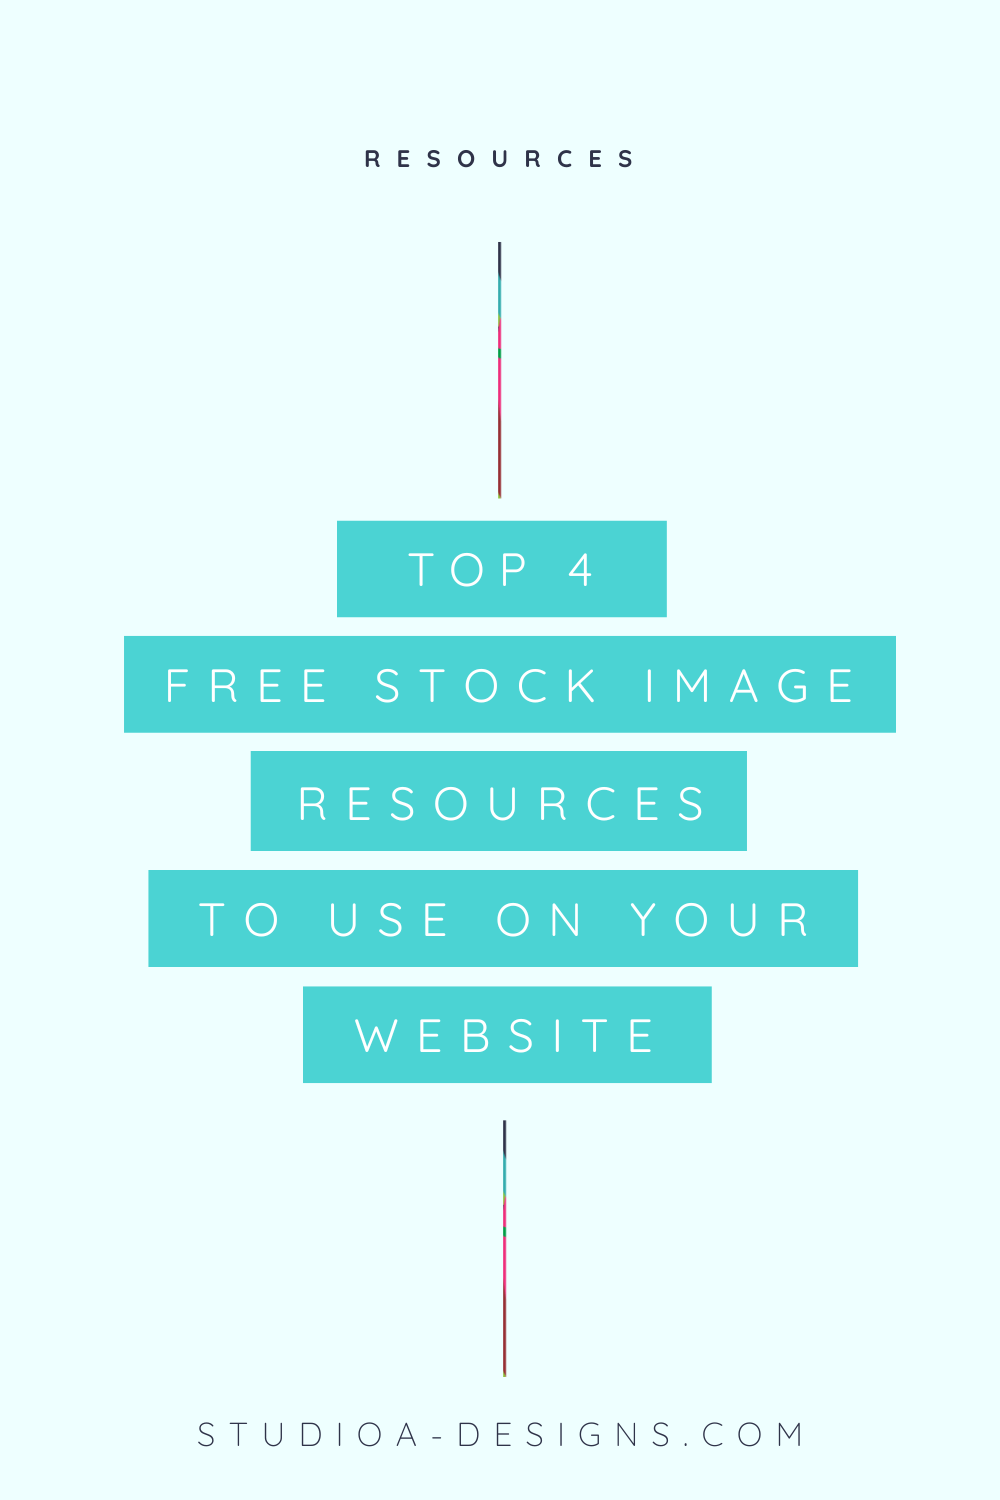 Top 4 Free Stock Image Resources to use on your website